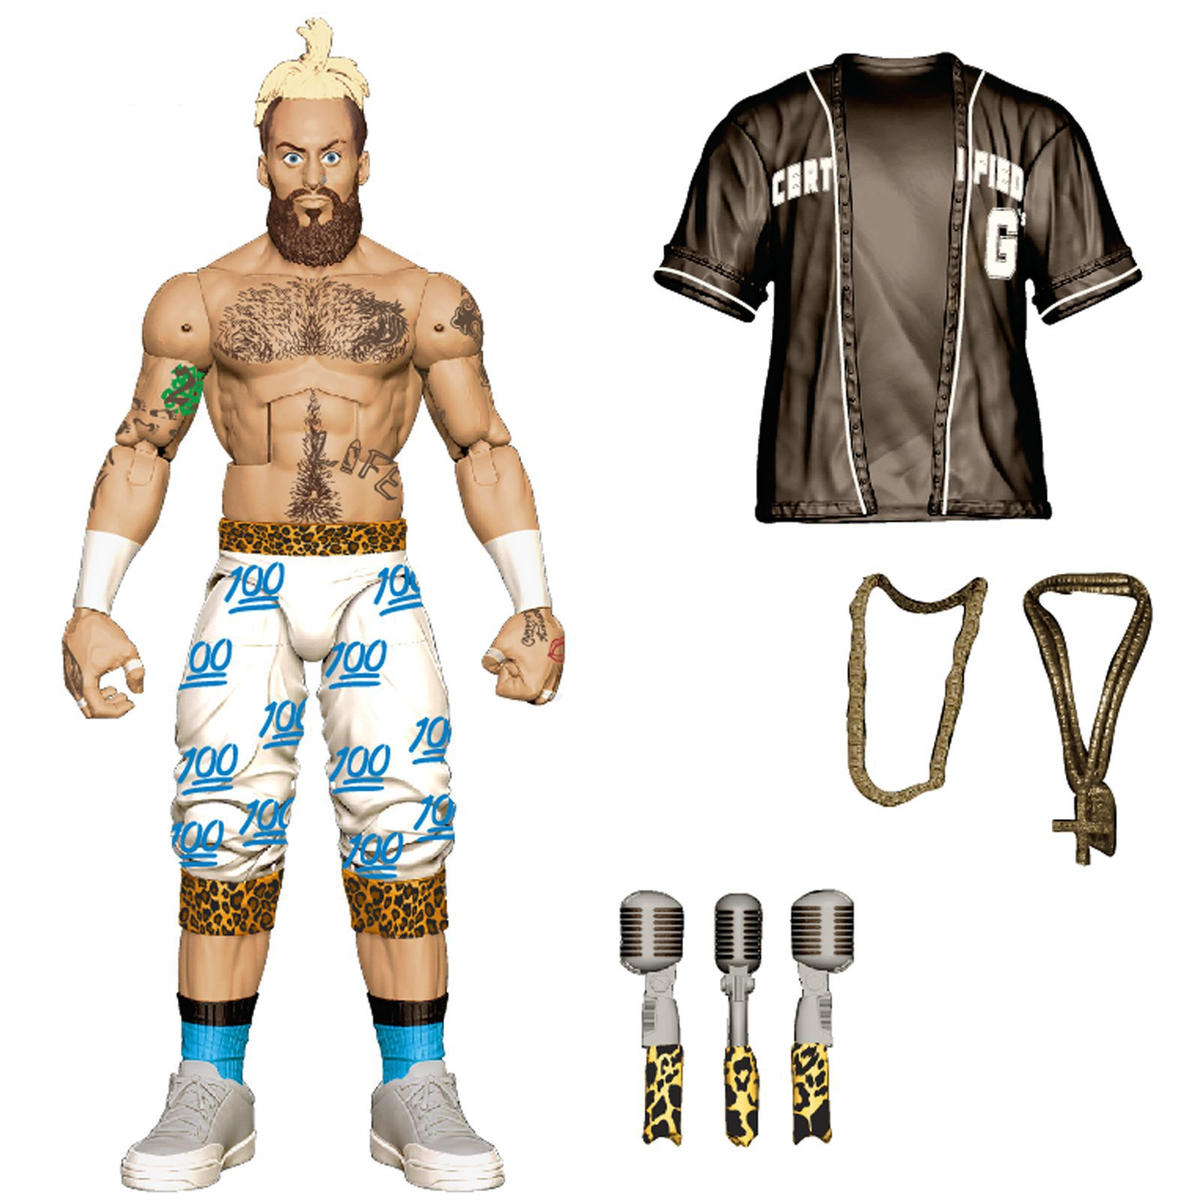 2017 WWE Mattel Elite Collection Series 55 Enzo Amore